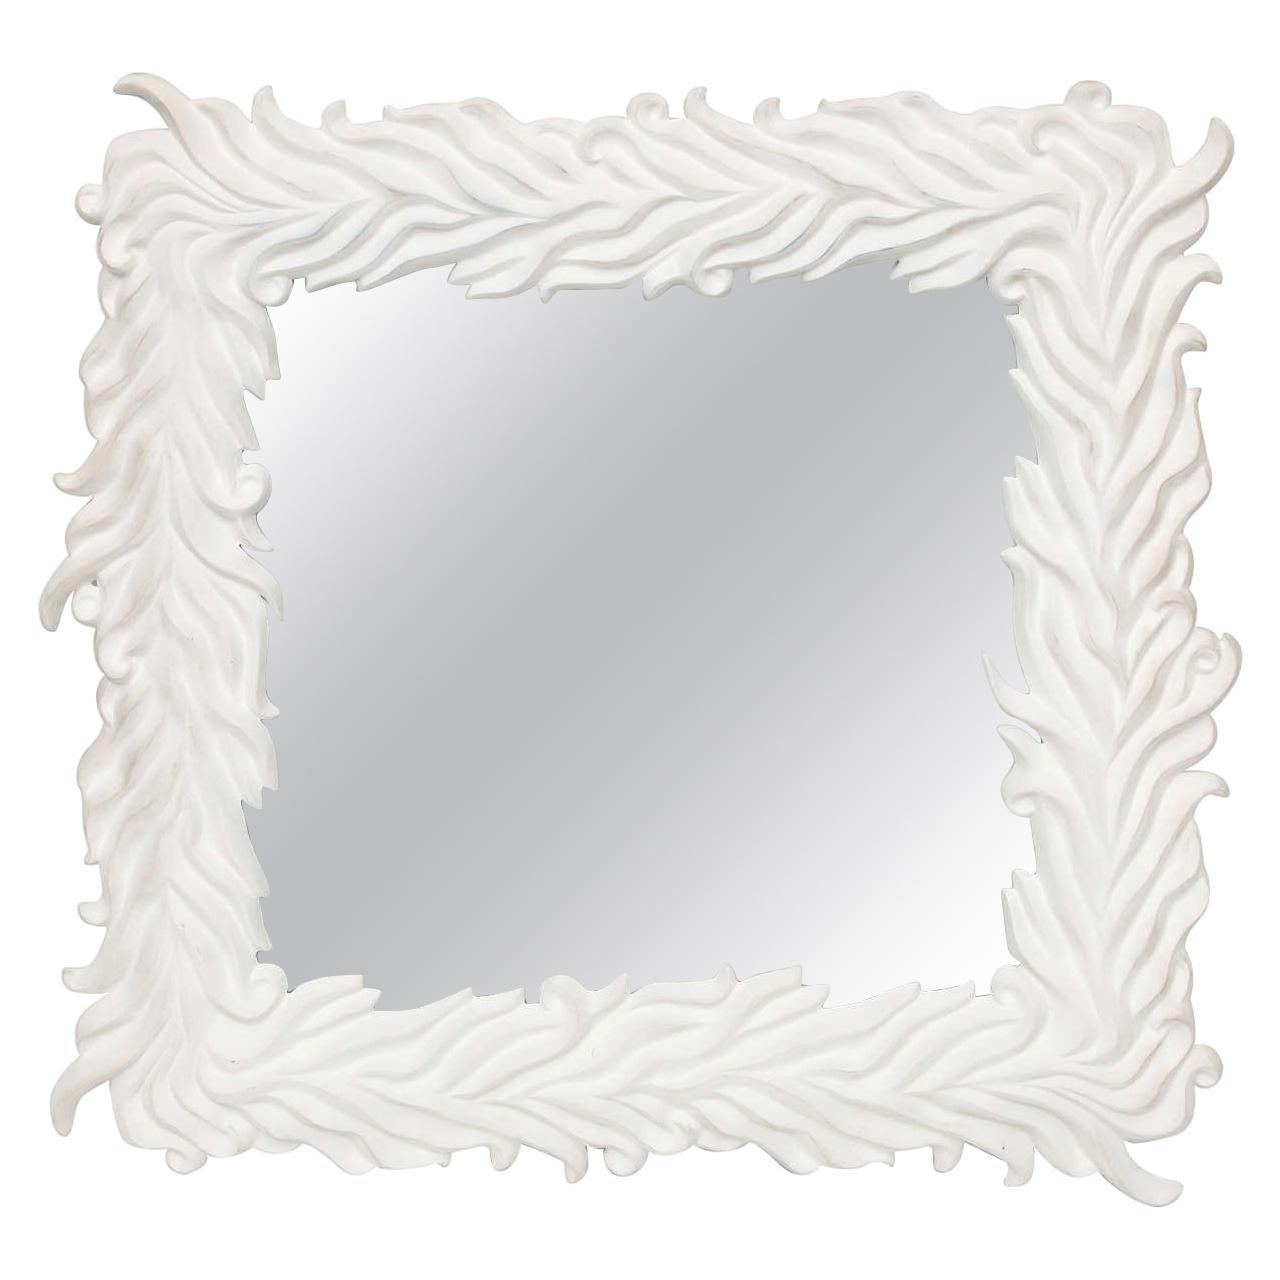 Marc Bankowsky, Plaster Mirror, France, 2006